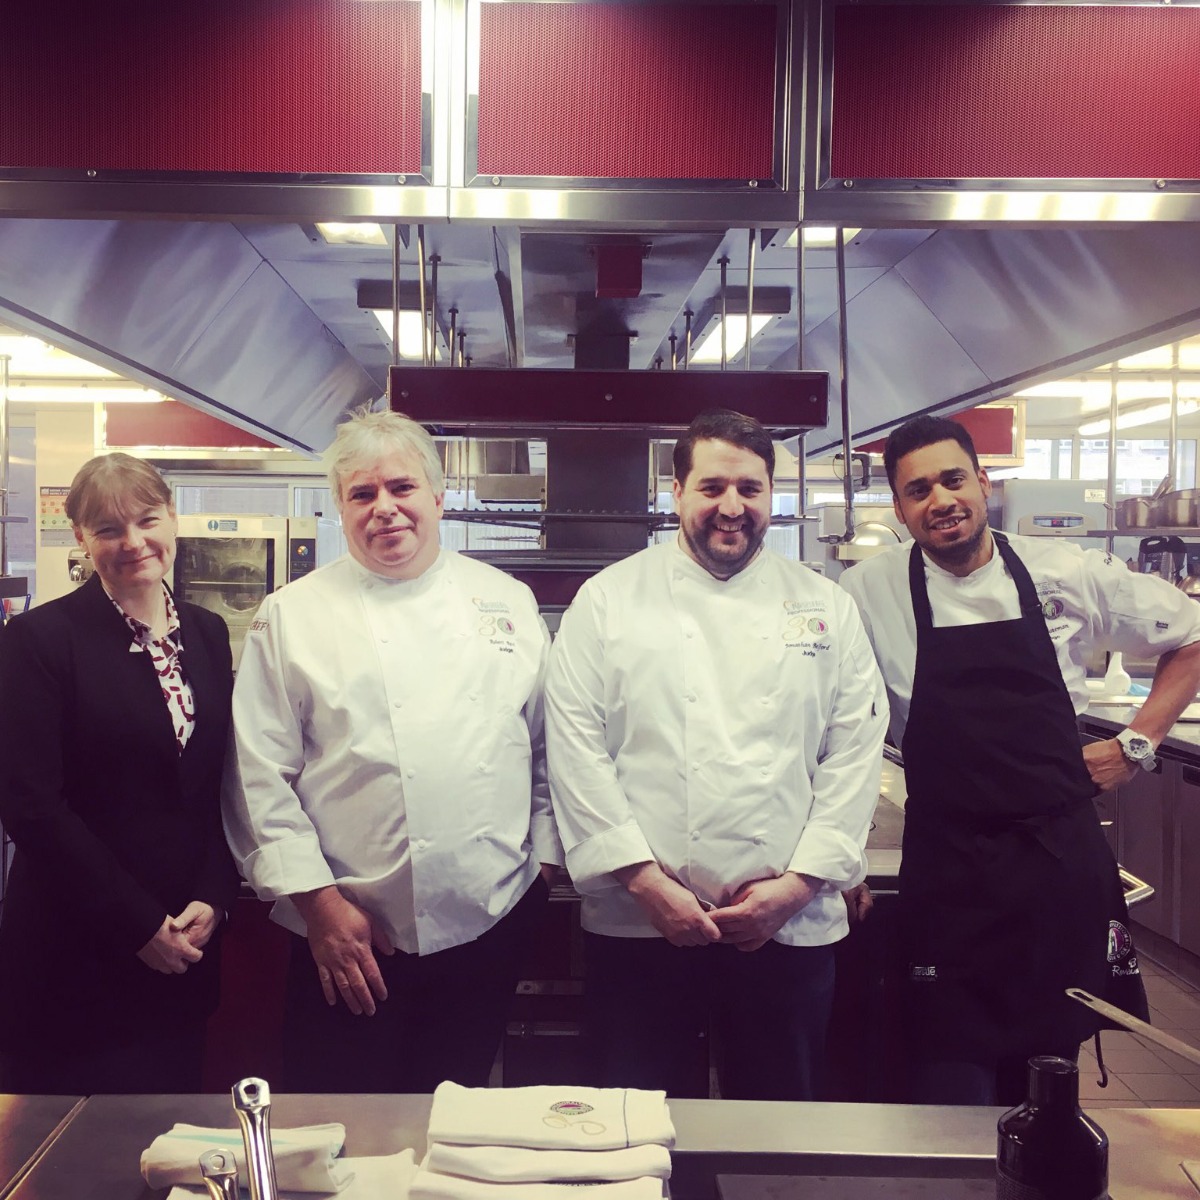 Nestle Toque d'Or masterclass chefs and front of house guru judging panel for National College heats of Toque d'Or, Le Chef Jacket (DE92)